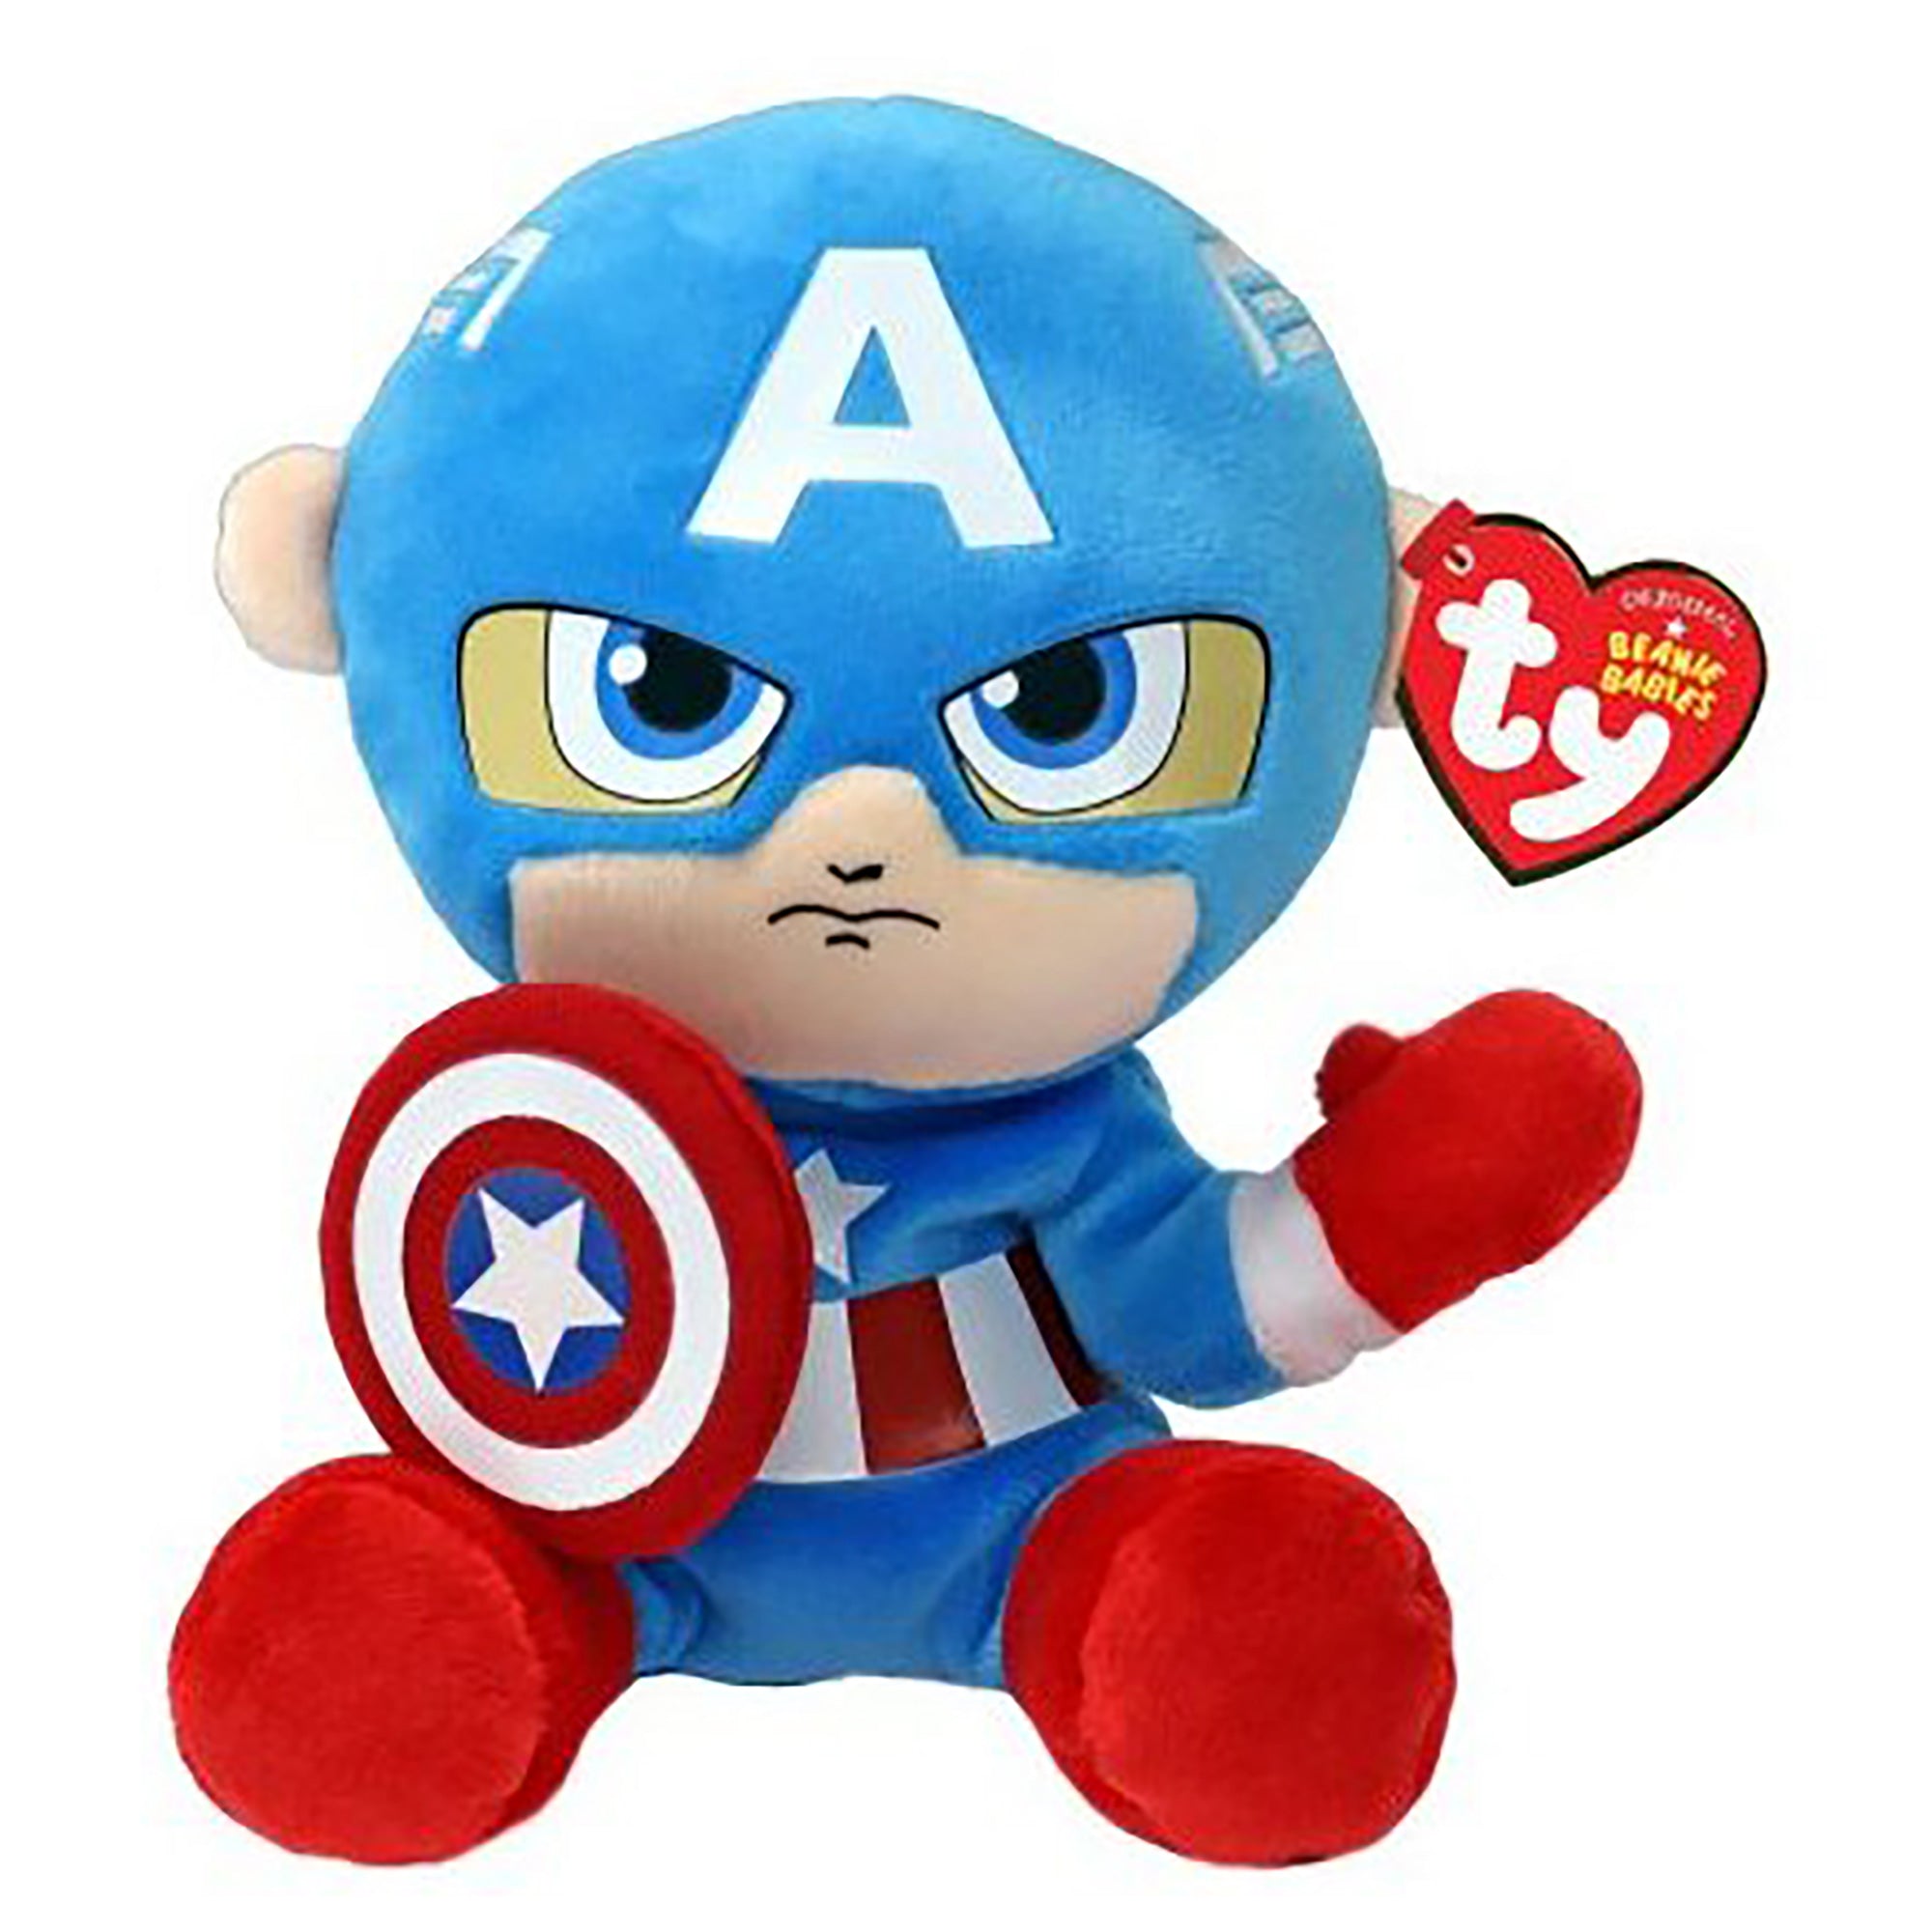 TY Marvel Soft Plush, Captain America, 13 Inches, 1 Count